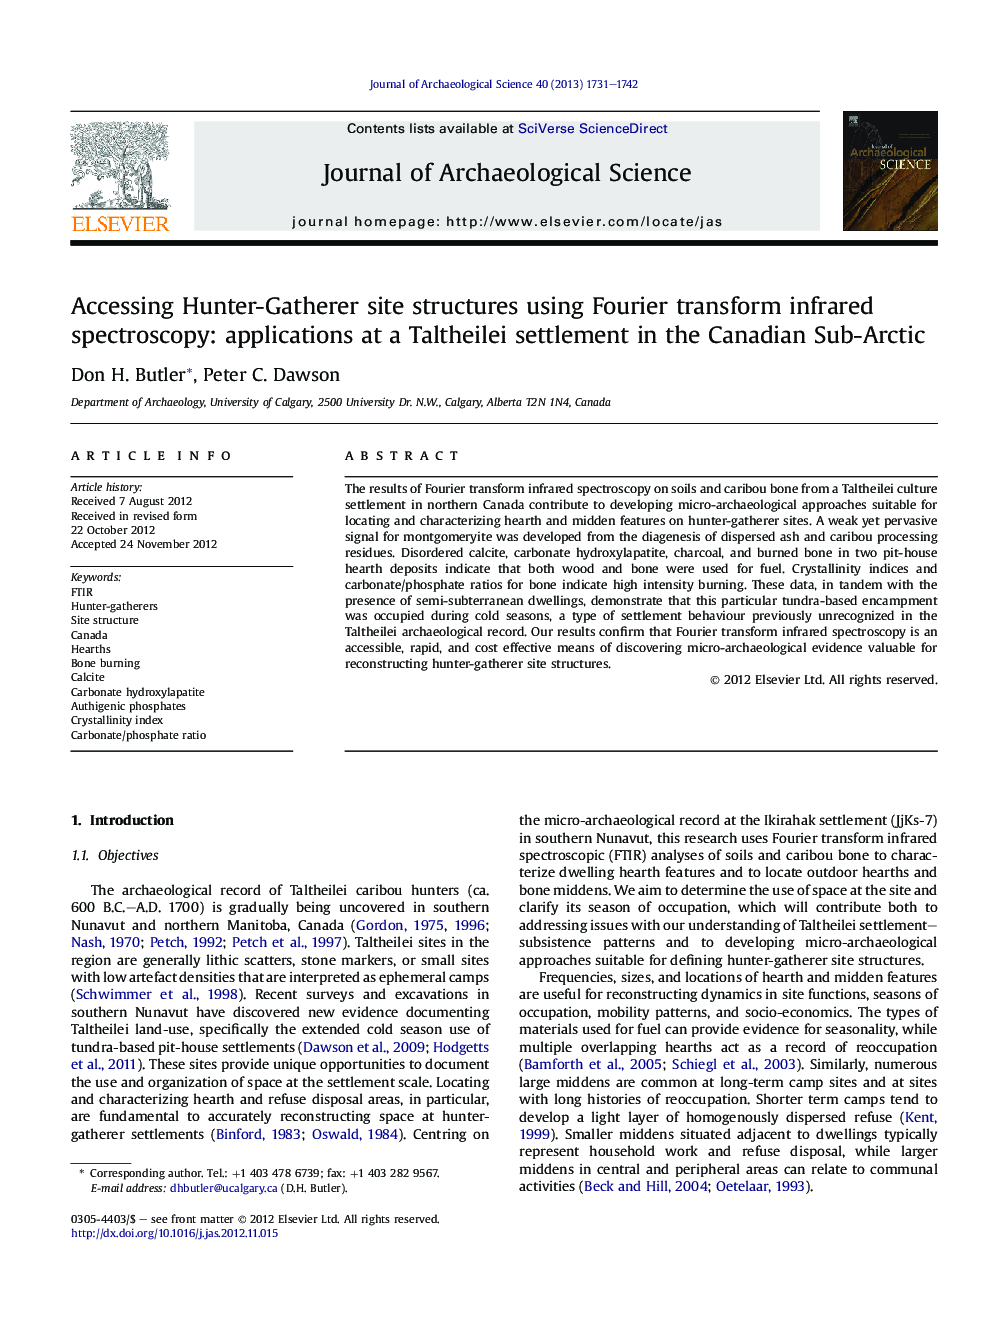 Accessing Hunter-Gatherer site structures using Fourier transform infrared spectroscopy: applications at a Taltheilei settlement in the Canadian Sub-Arctic